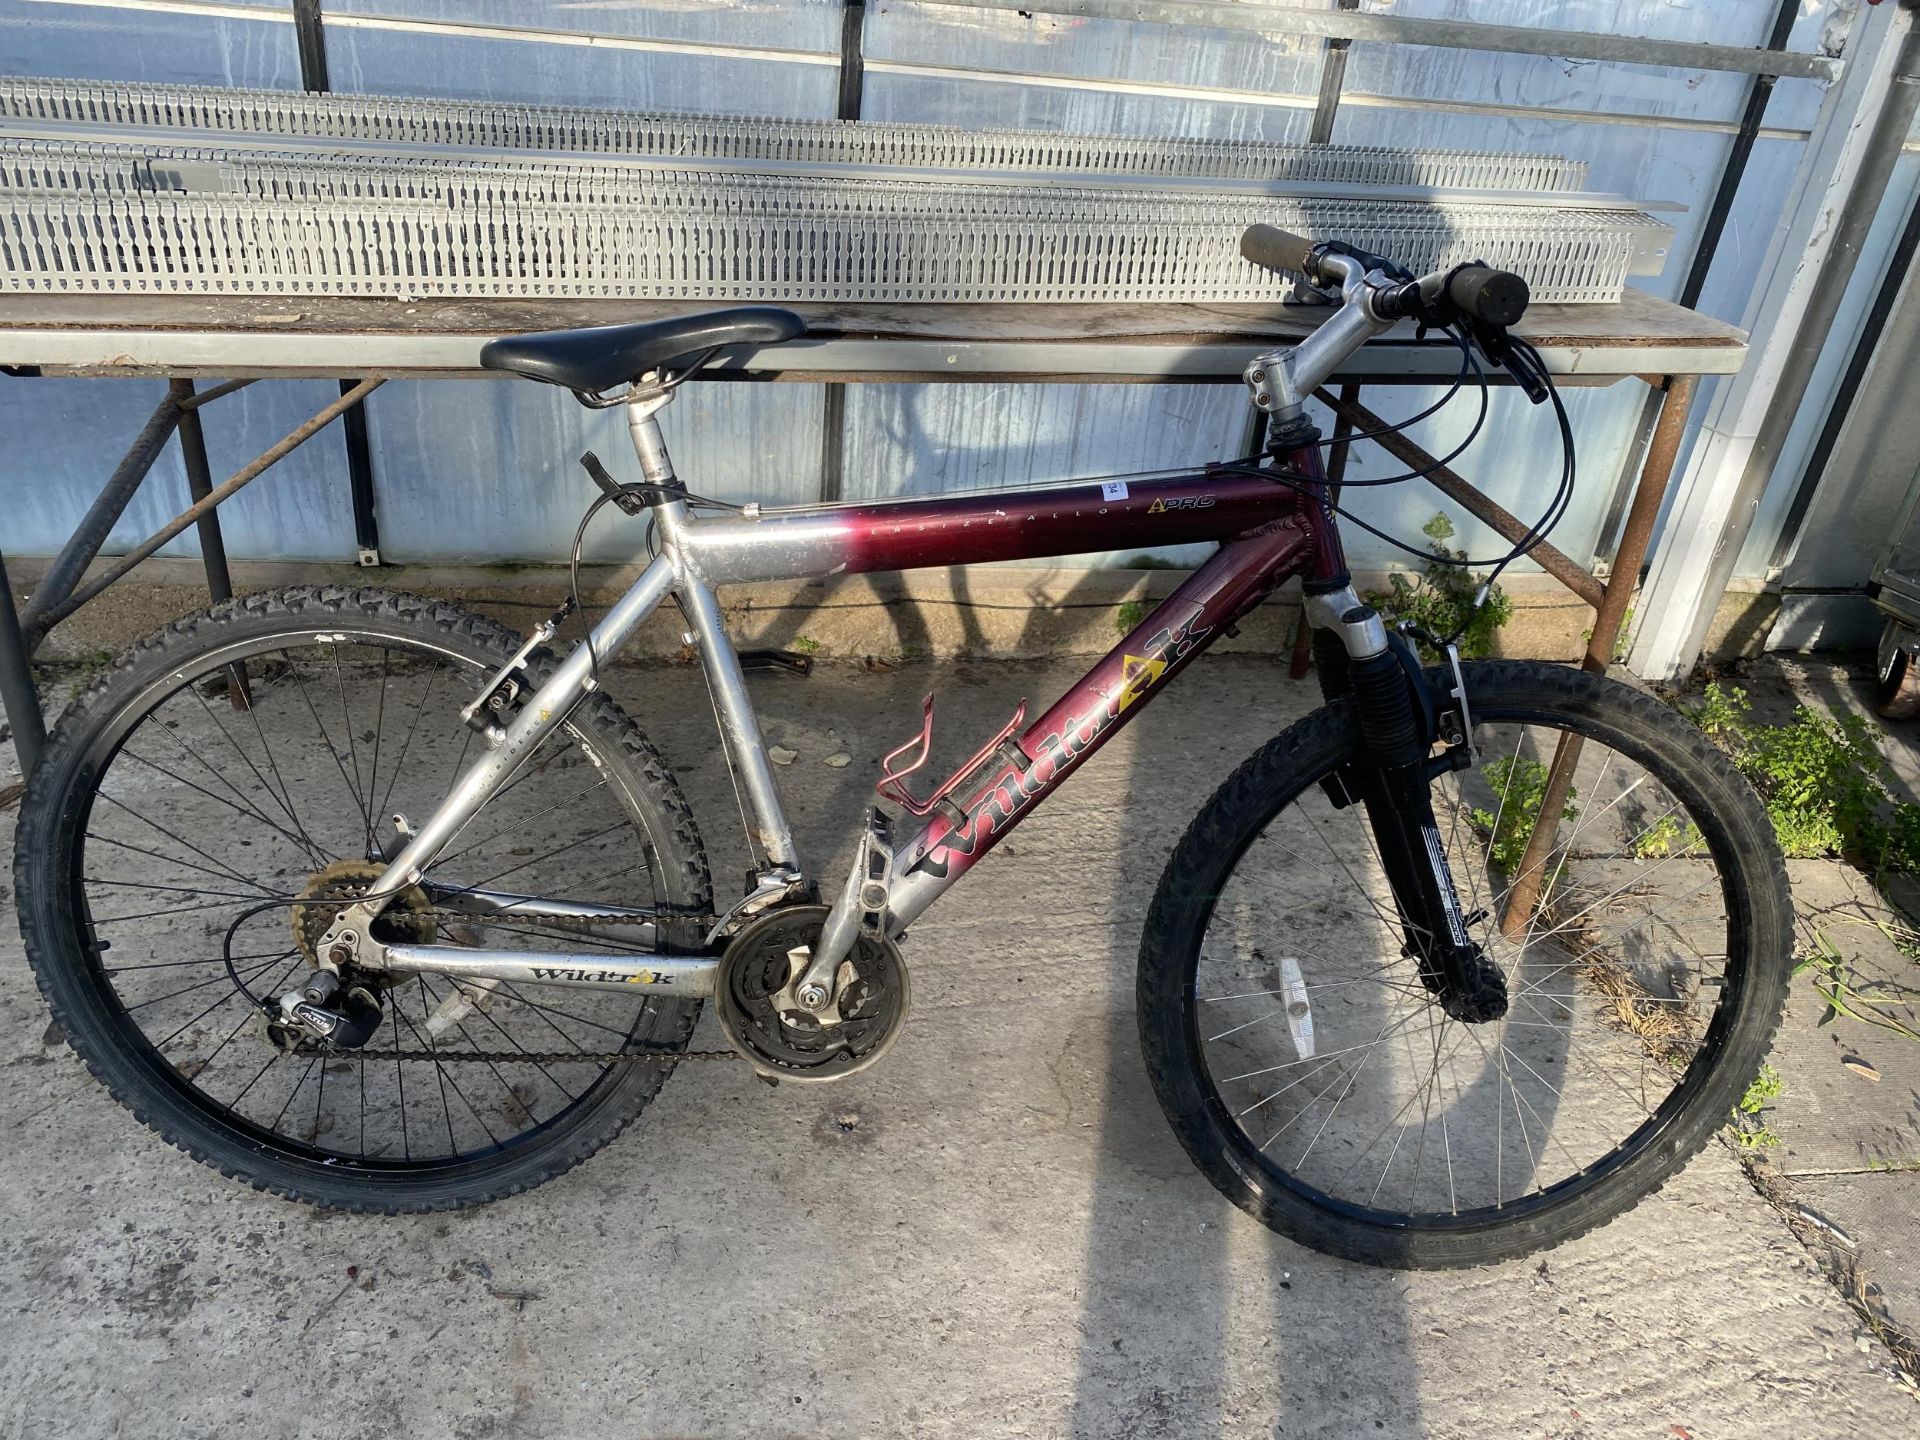 A WILDTRAK GENTS MOUNTAIN BIKE WITH FRONT SUSPENSION AND 12 SPEED SHIMANO GEAR SYSTEM